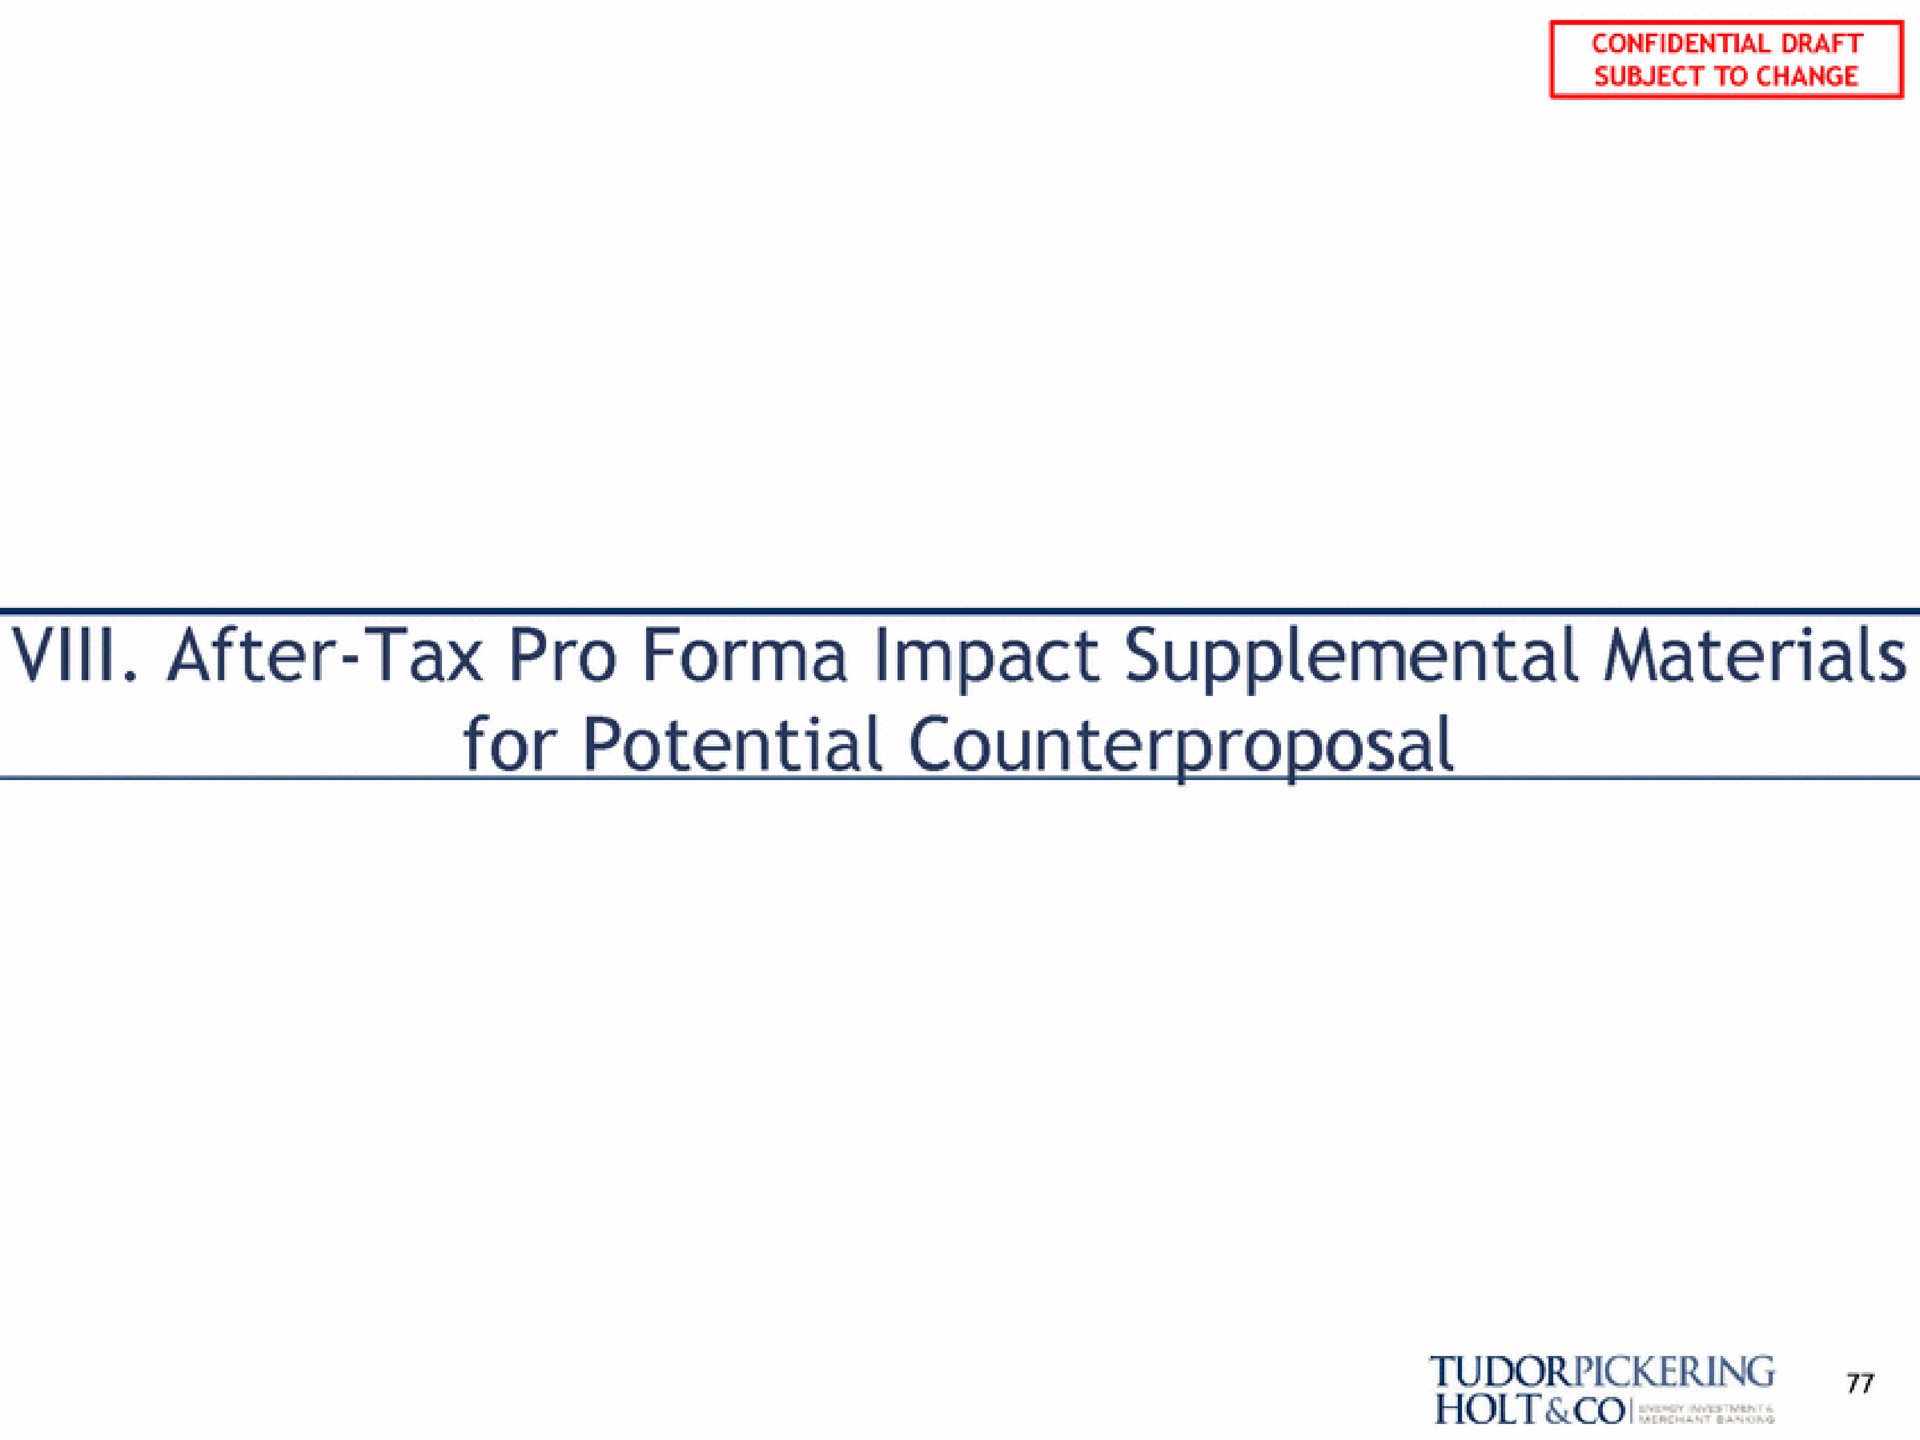 vill after tax pro impact supplemental materials for potential counterproposal | Tudor, Pickering, Holt & Co